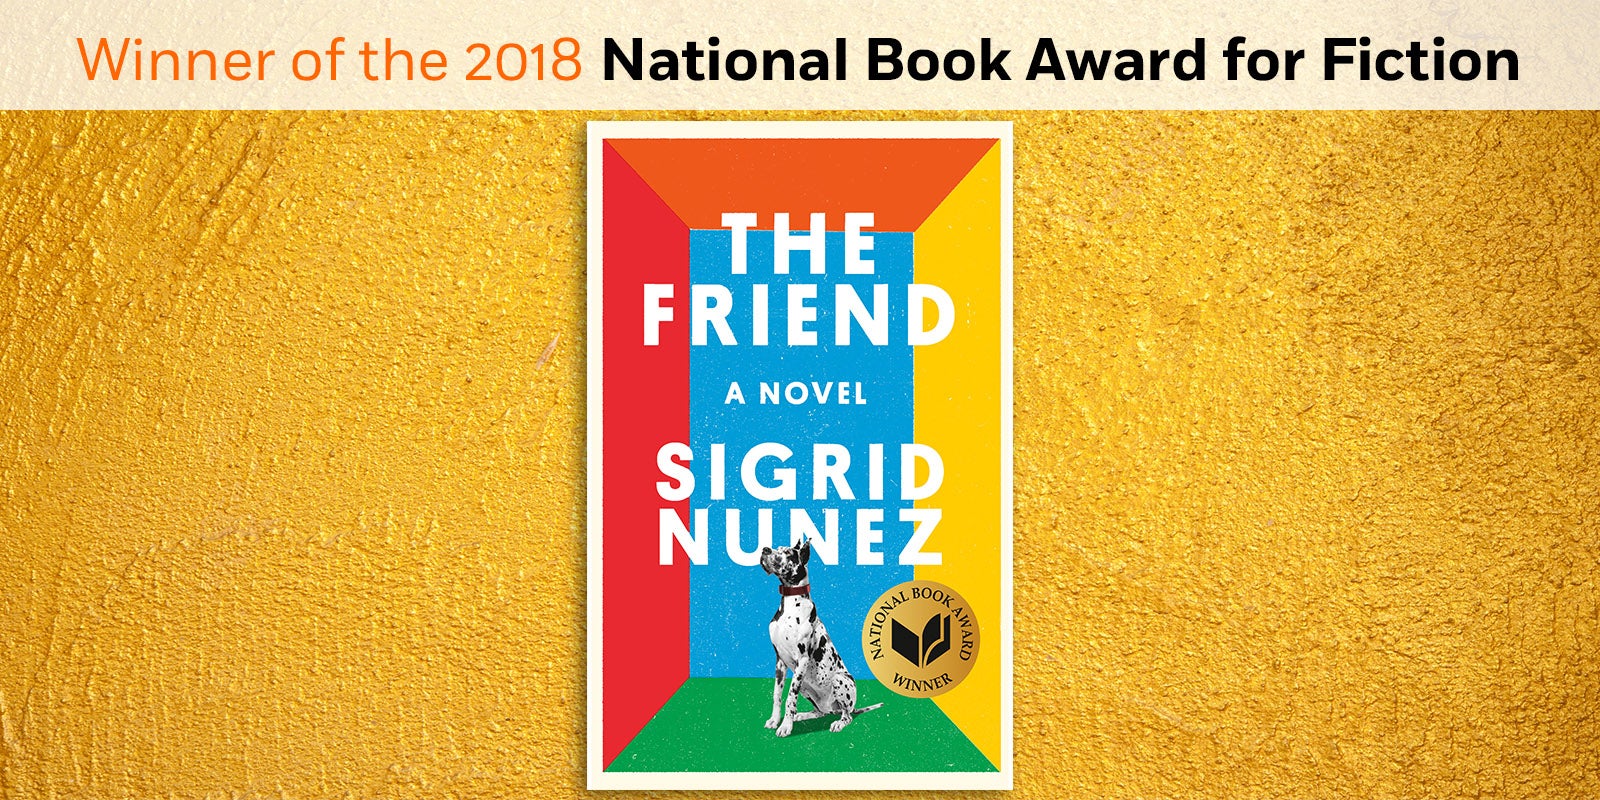 THE FRIEND wins The 2018 National Book Award for Fiction